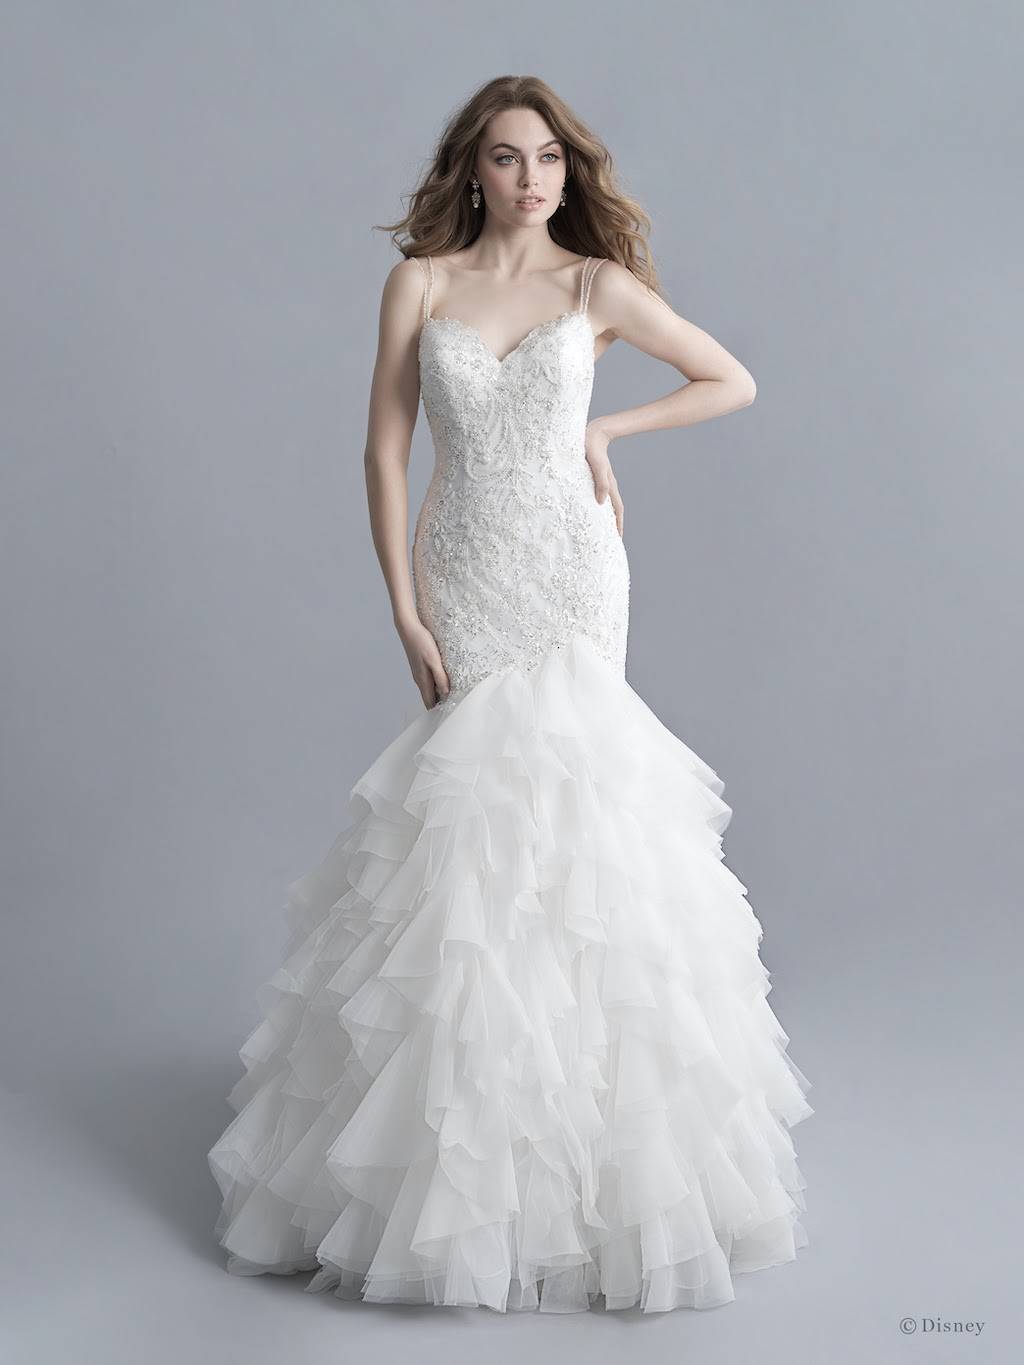 Allure Bridals Launches Disney Fairy Tale Weddings Collections ...